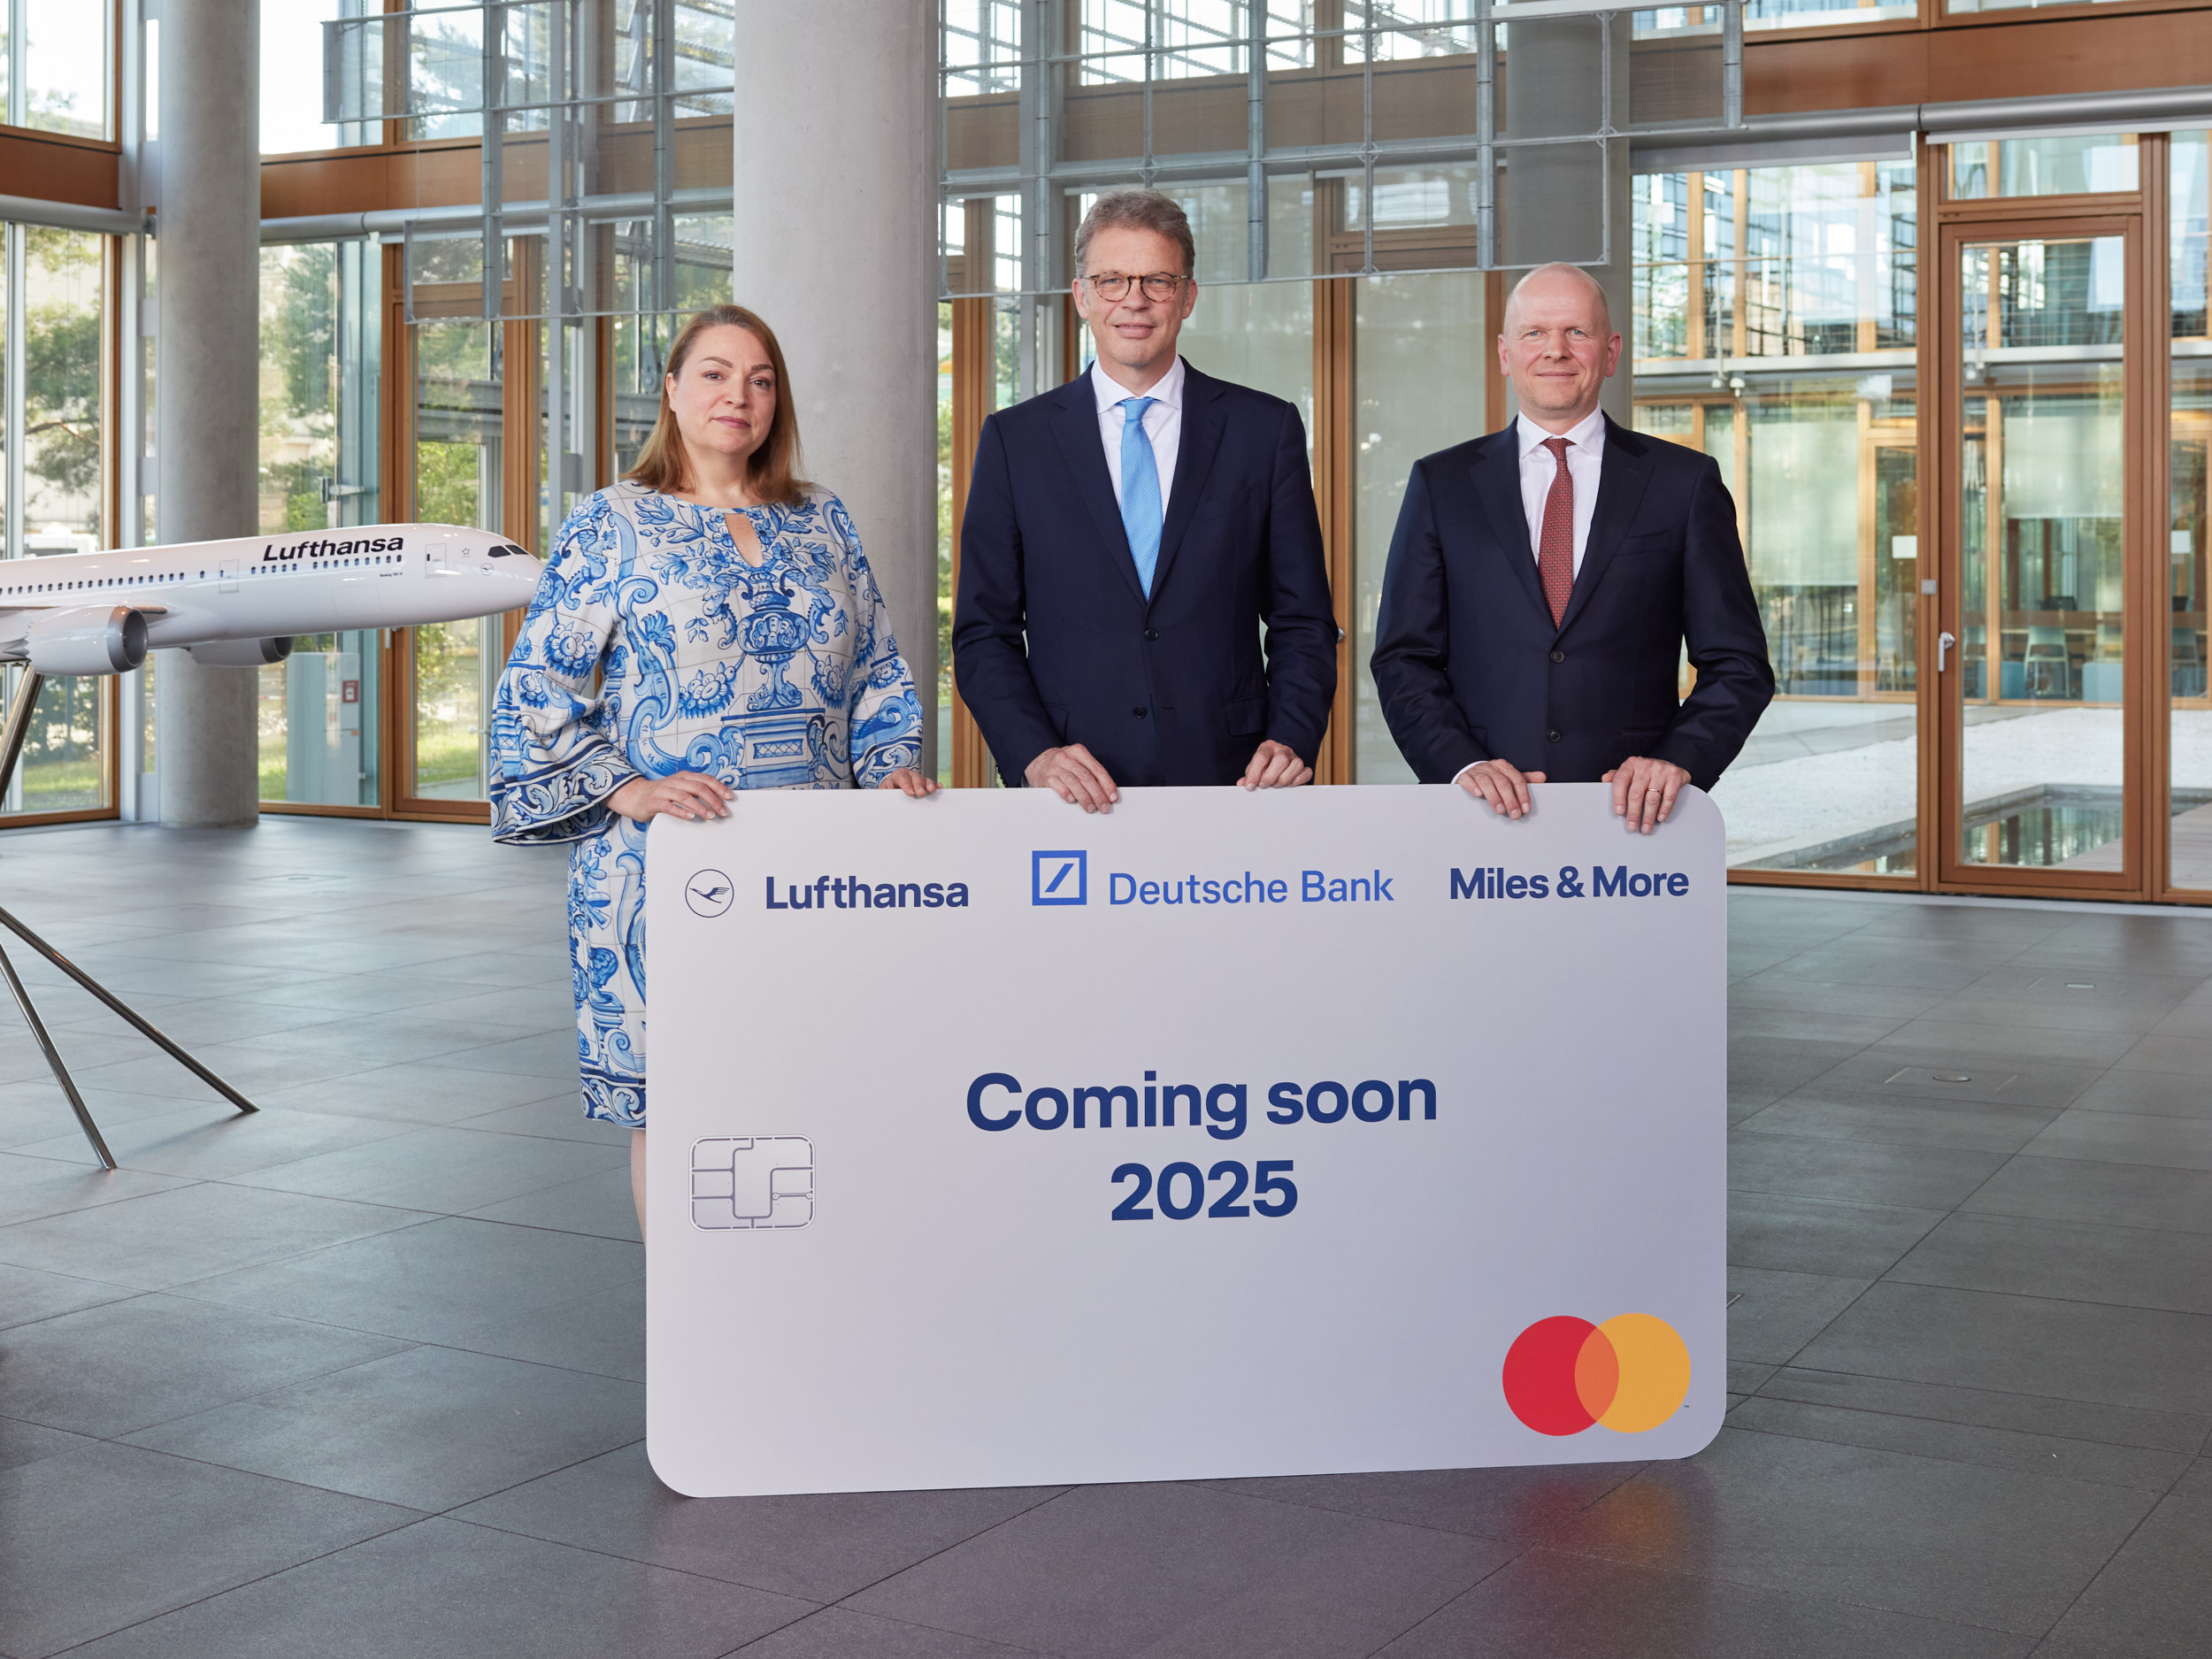 From left, Christina Foerster, member of the Executive Board of Deutsche Lufthansa AG, Christian Sewing, CEO of Deutsche Bank and chairman of the Management Board, and Mastercard CEO Michael Miebach